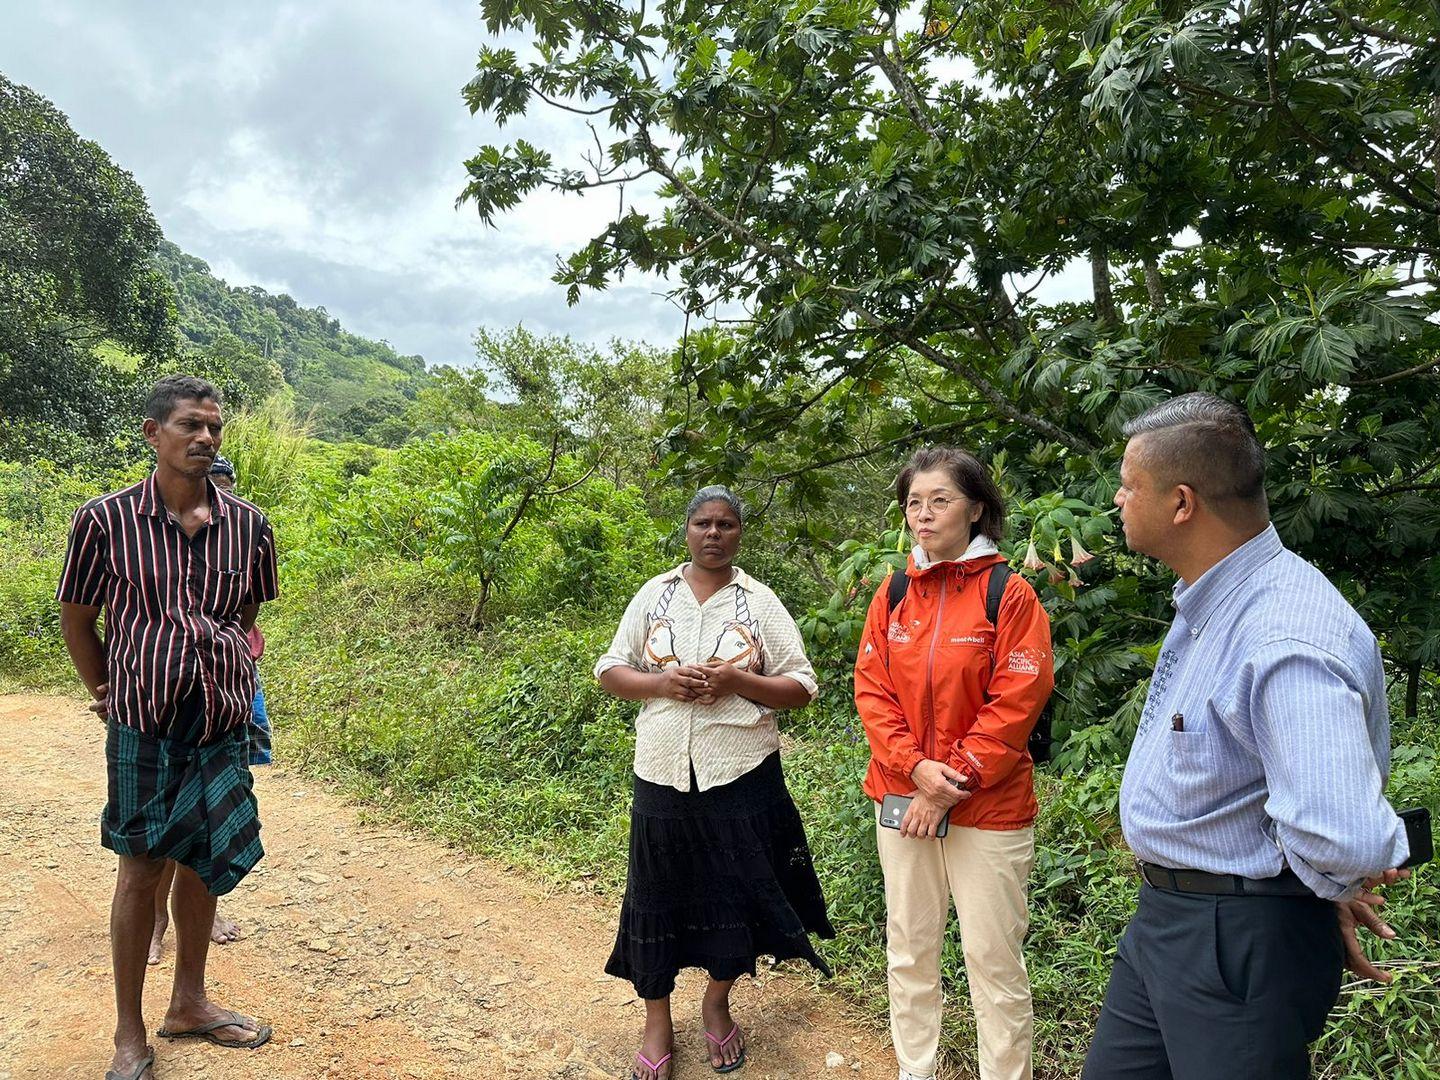 Landslide Risks and Community Resettlement Efforts: A-PAD’s Visit to Pettigala and Yakdehikanda